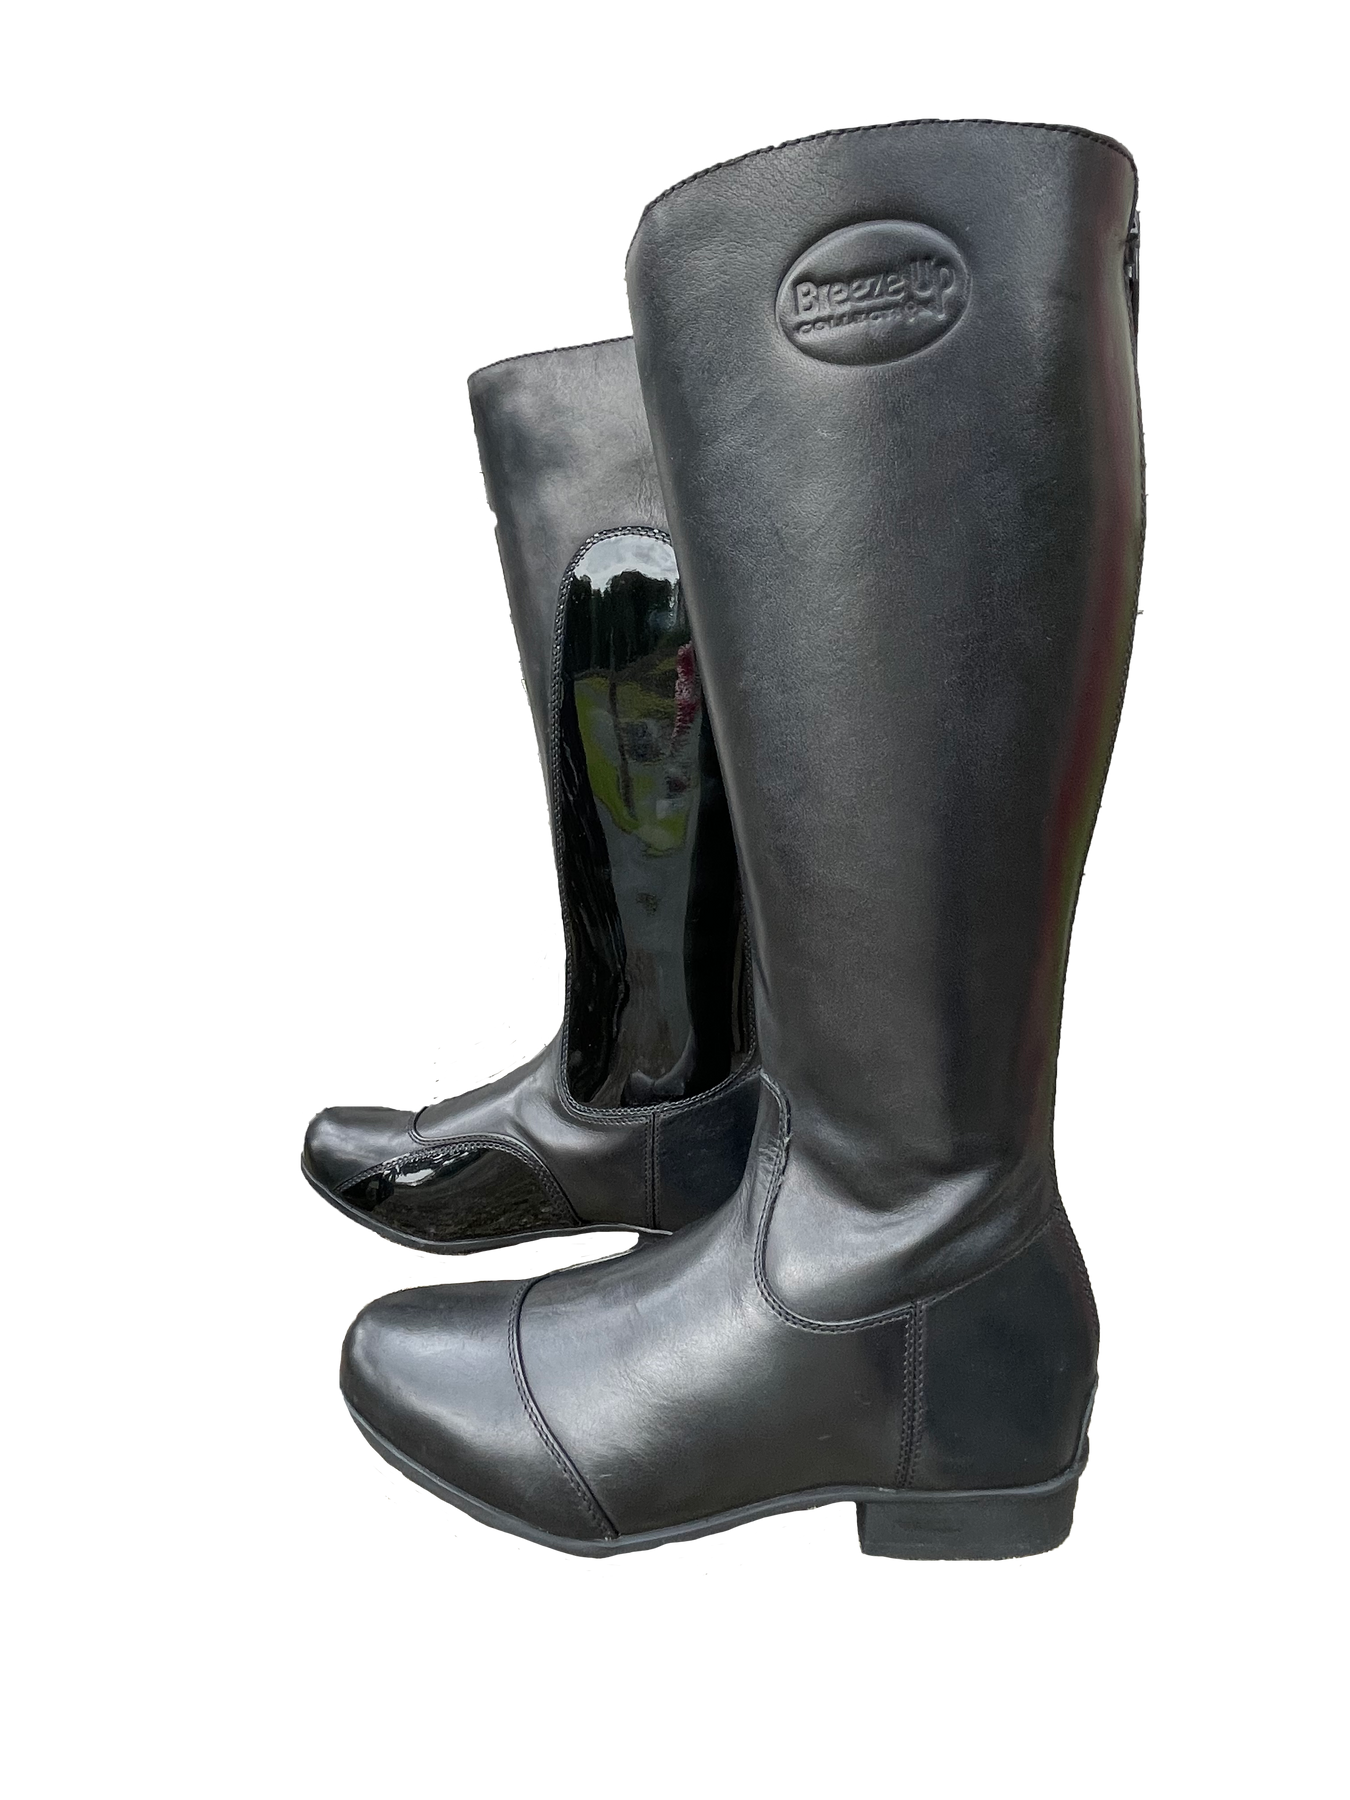 BREEZEUP ECLIPSE LEATHER EXERCISE BOOT PATENT